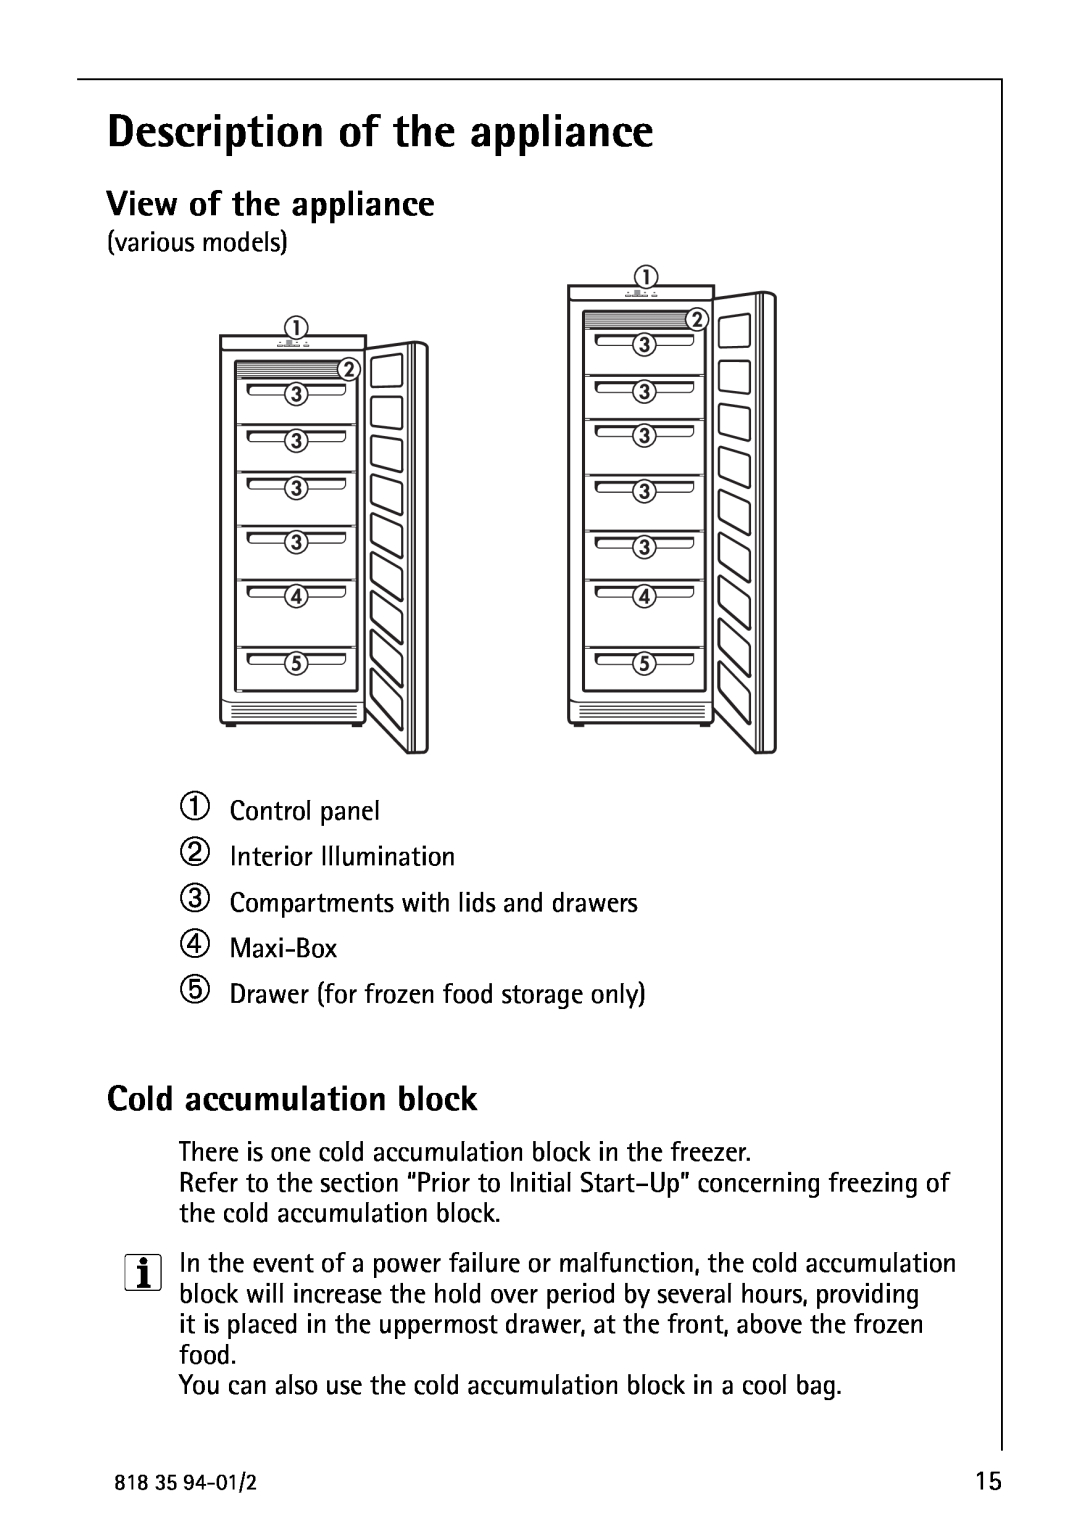 Electrolux U31462 operating instructions Description of the appliance, View of the appliance, Cold accumulation block 